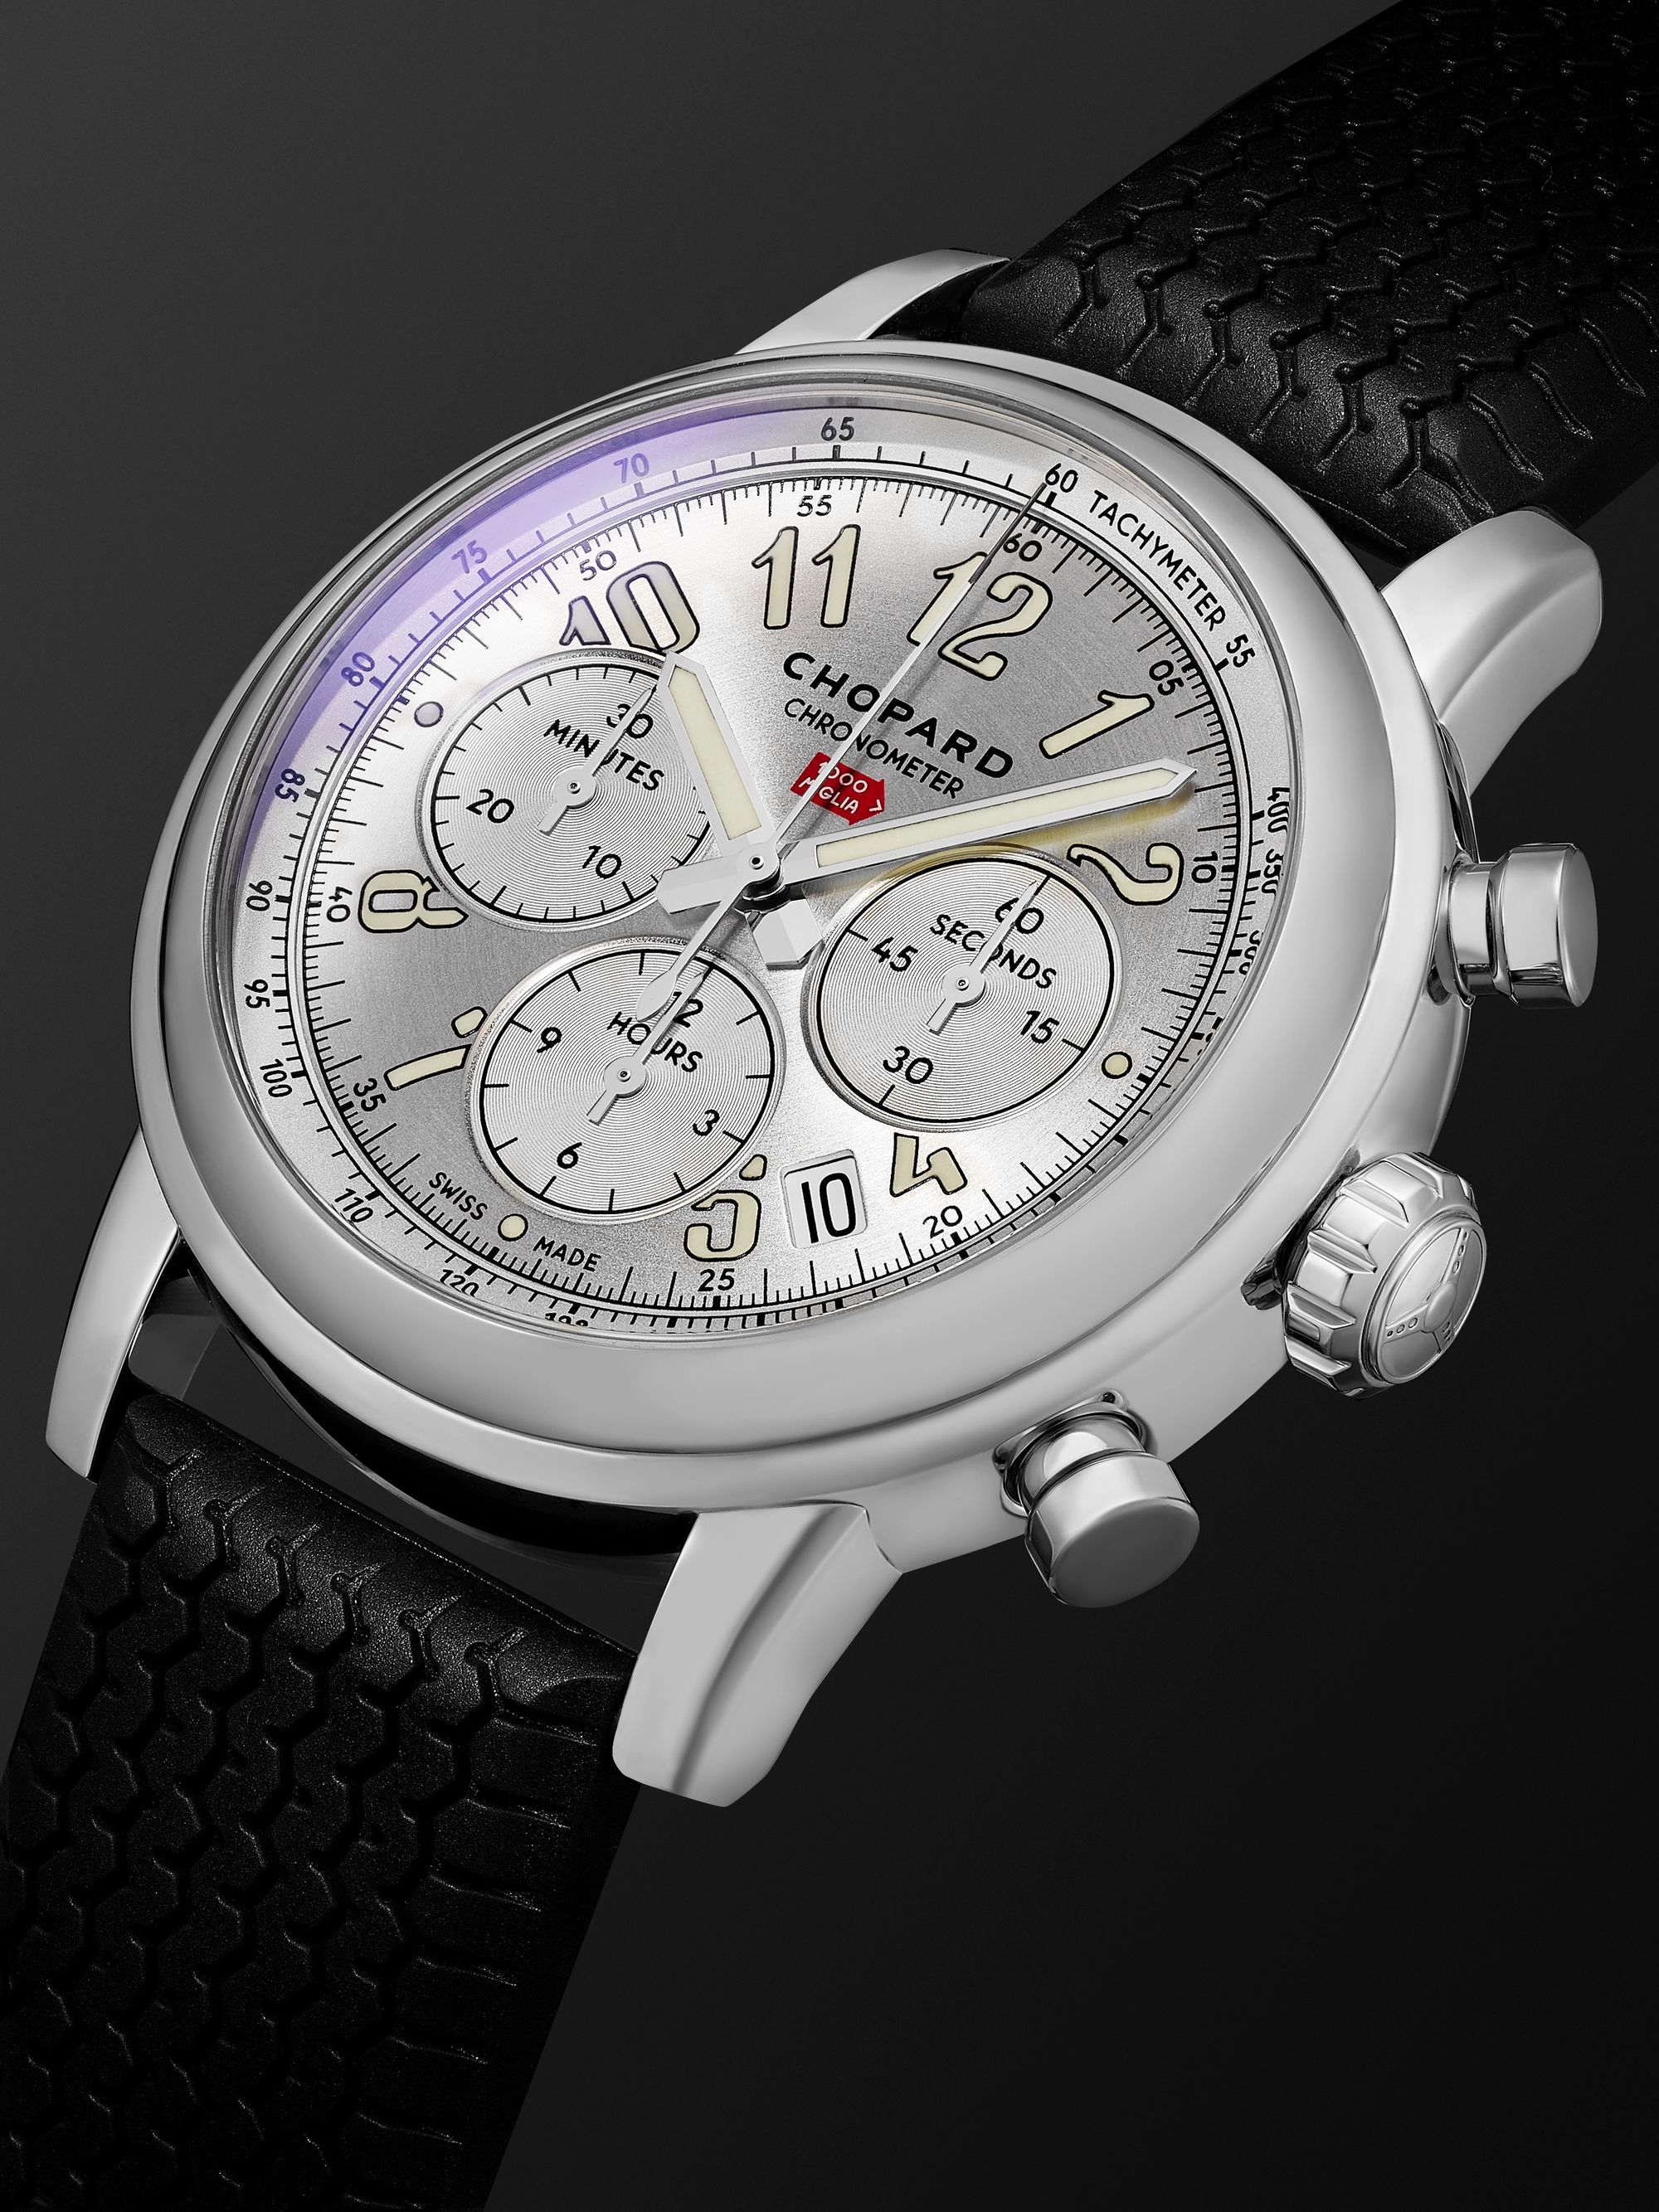 CHOPARD Mille Miglia Classic Chronograph Automatic 42mm Stainless Steel Watch, Ref. No. 168589-3001